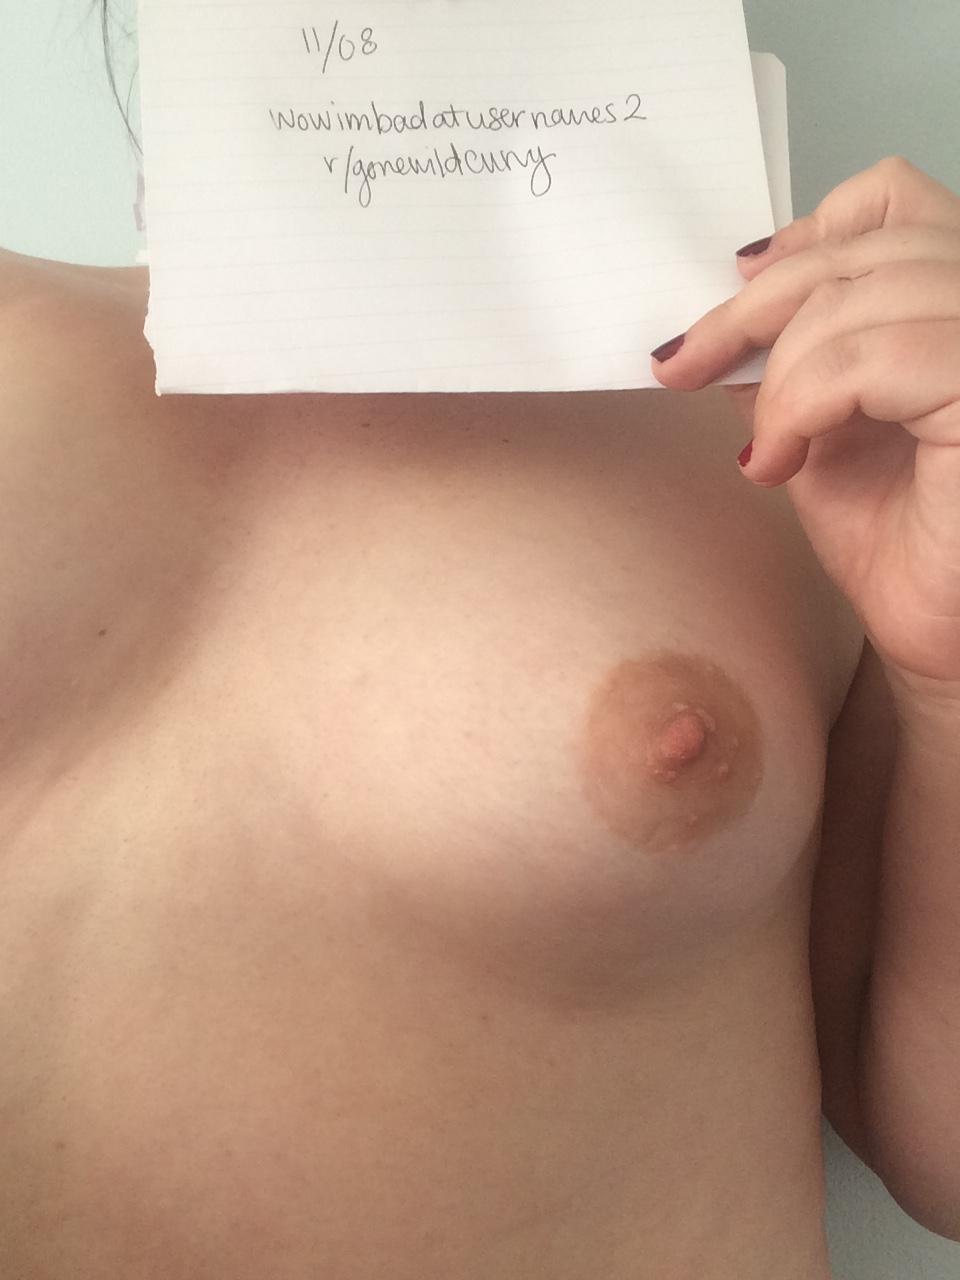 Just a quick verification before the (f)un xo